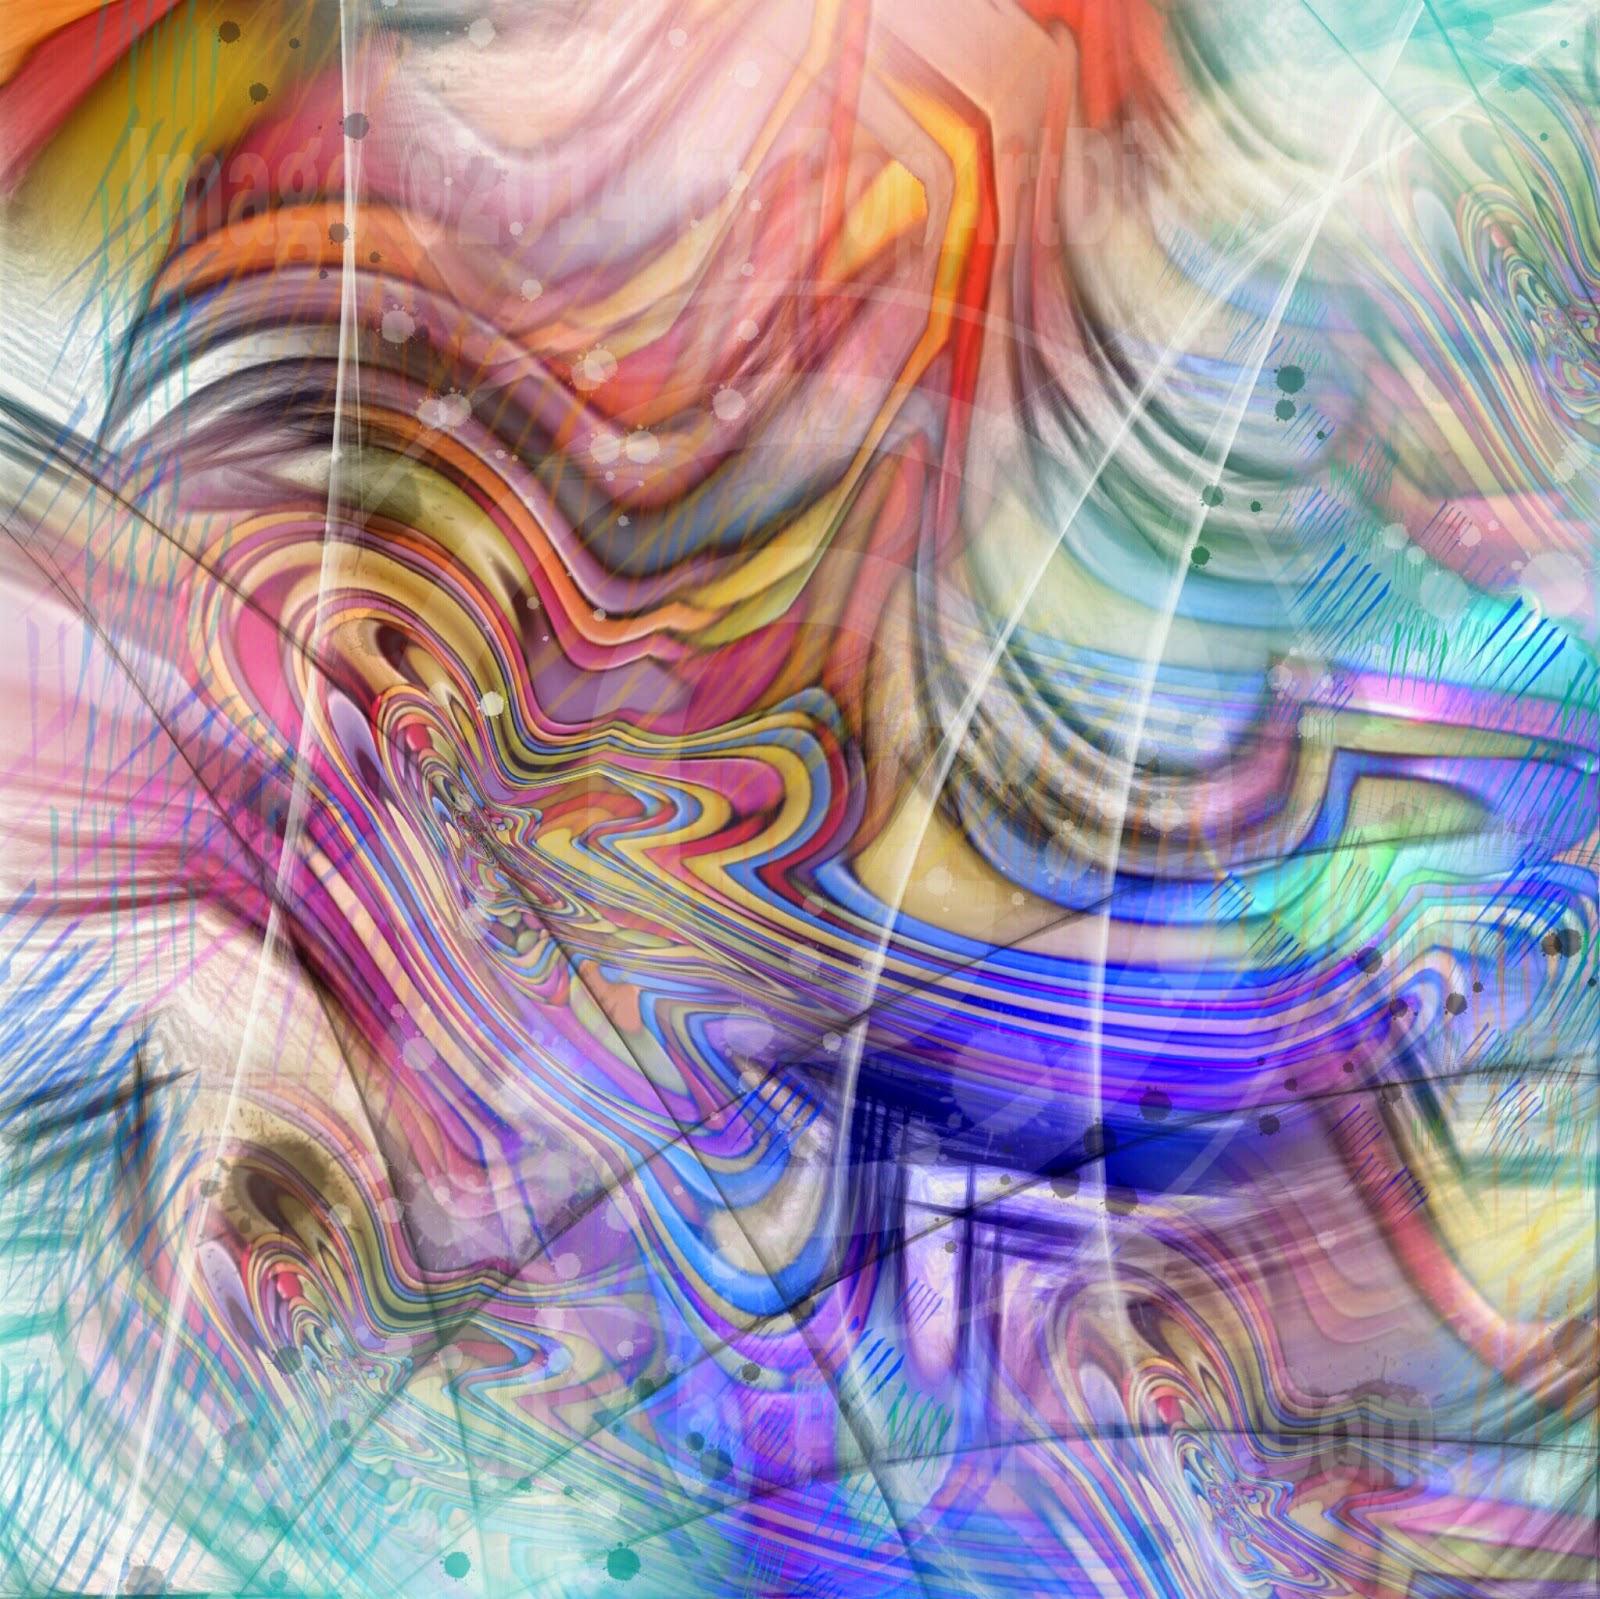 http://store.payloadz.com/details/2084840-photos-and-images-abstract-squished-universe-abstract-web-graphic.html